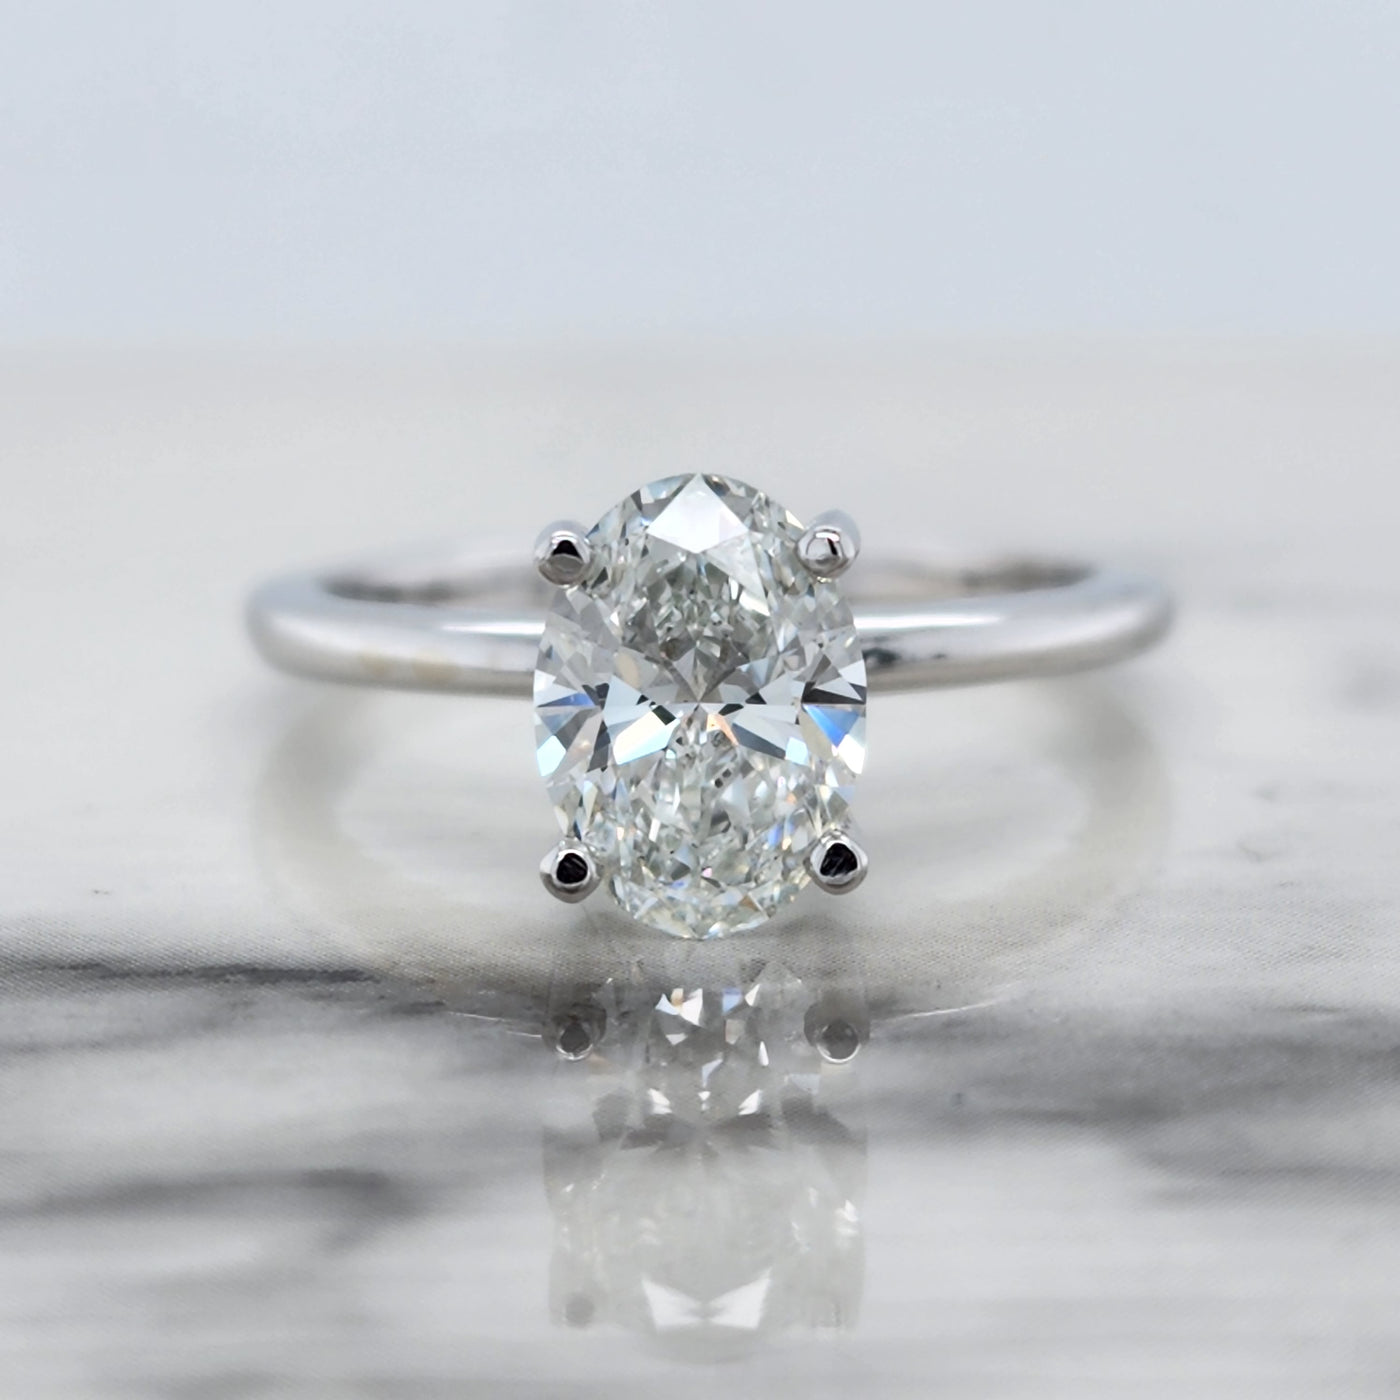 White Gold Solitaire Engagement Ring With Oval Diamond